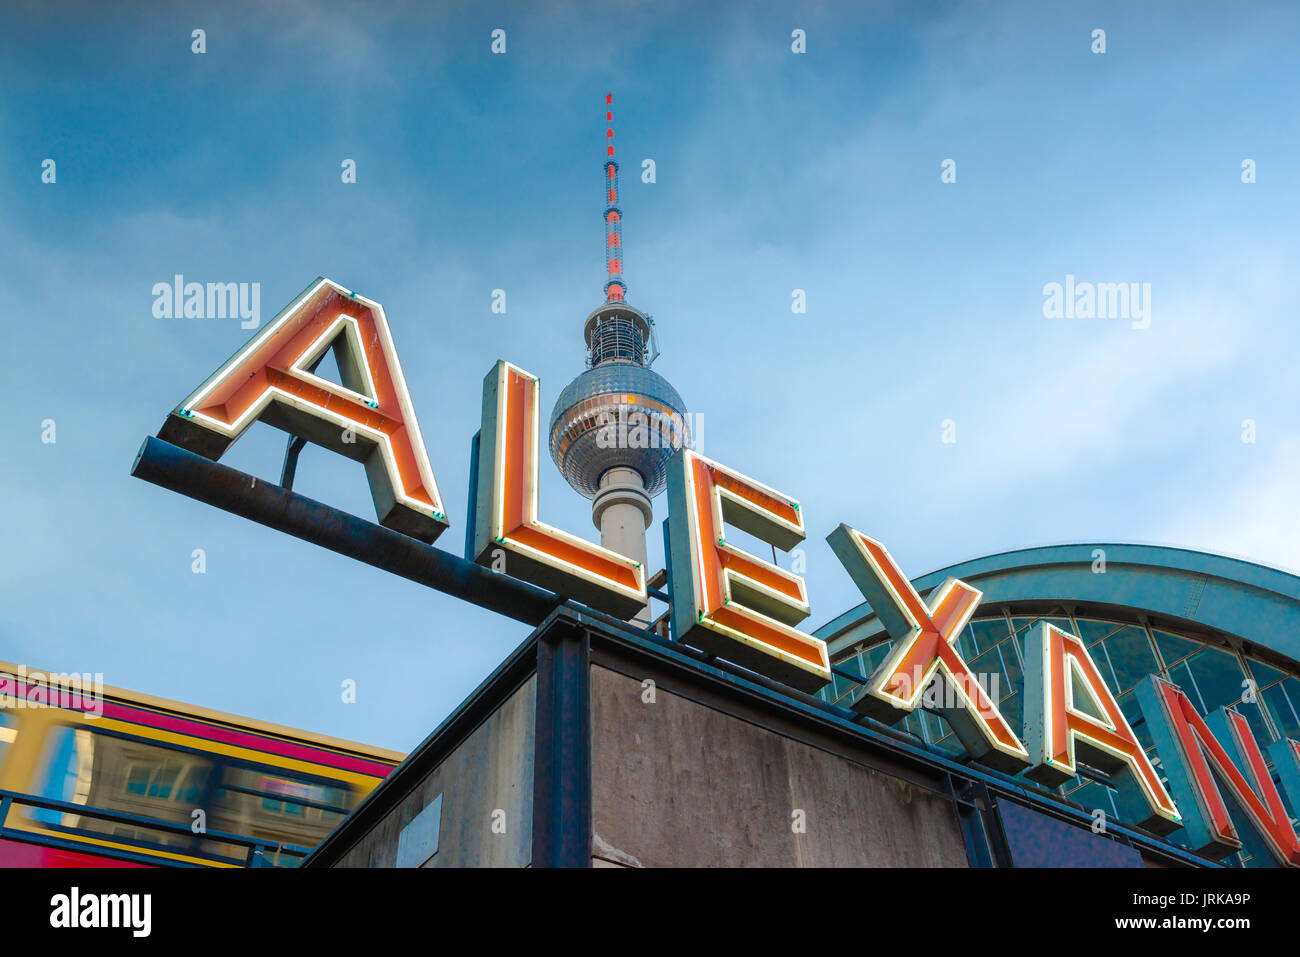 Berlin Alexanderplatz, view of the famous red neon sign at Alexanderplatz train station in the center of Berlin, Germany. Stock Photo